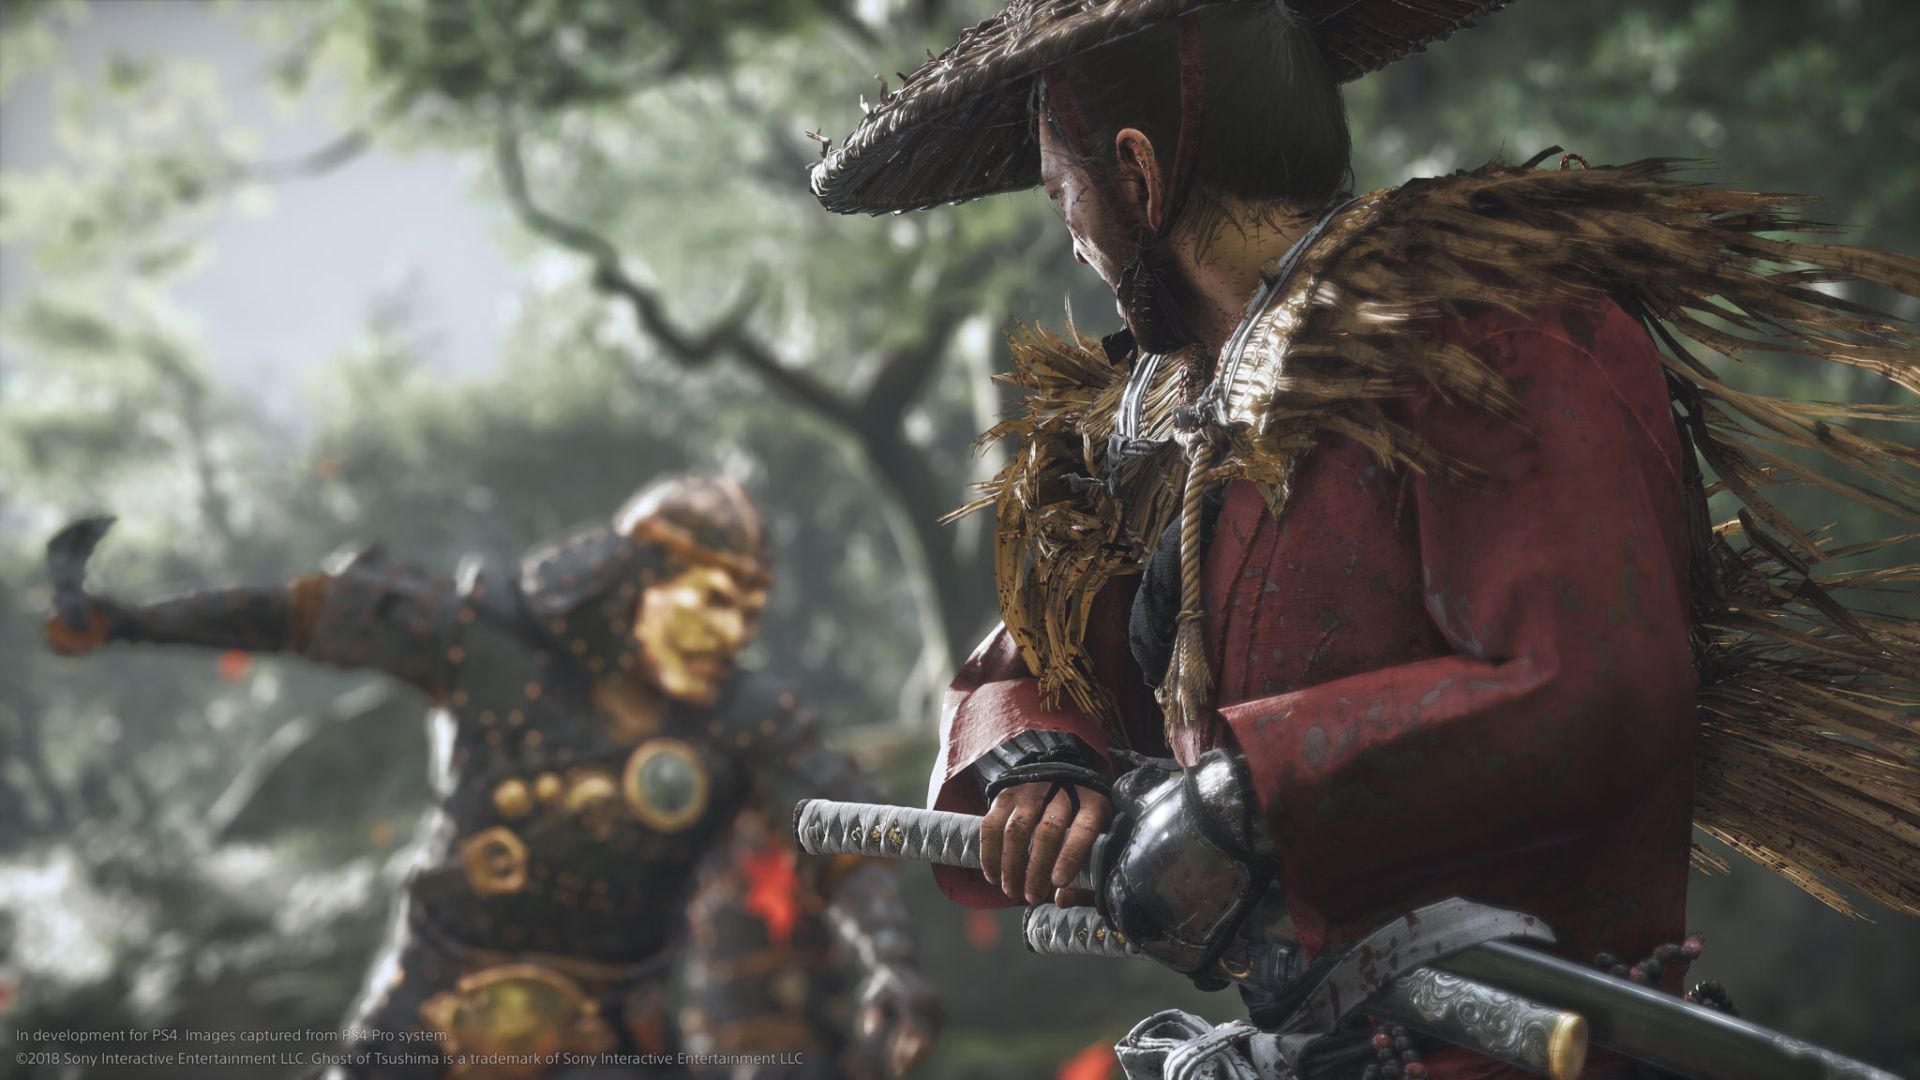 Image for Yes, the stunning Ghost of Tsushima will have a photo mode